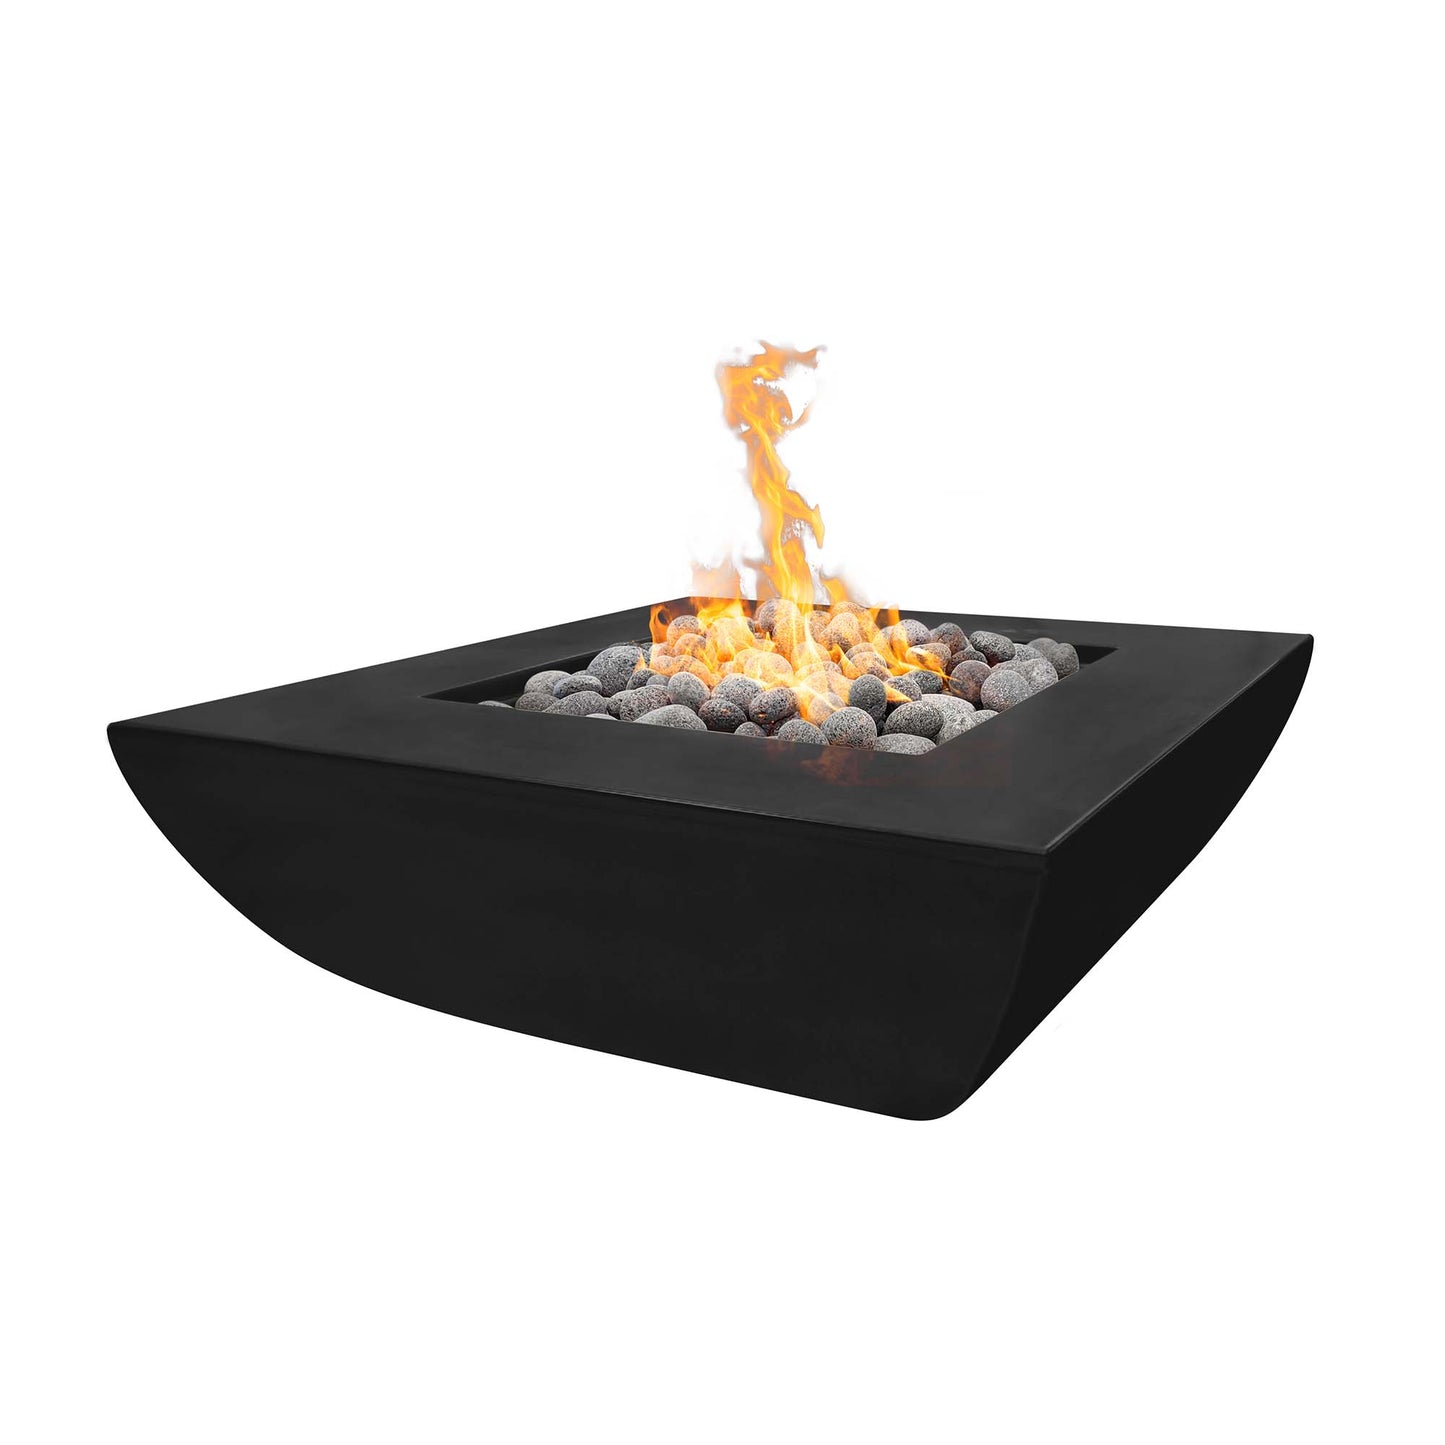 The Outdoor Plus Square Avalon 42" Metallic Copper GFRC Concrete Natural Gas Fire Pit with Match Lit Ignition